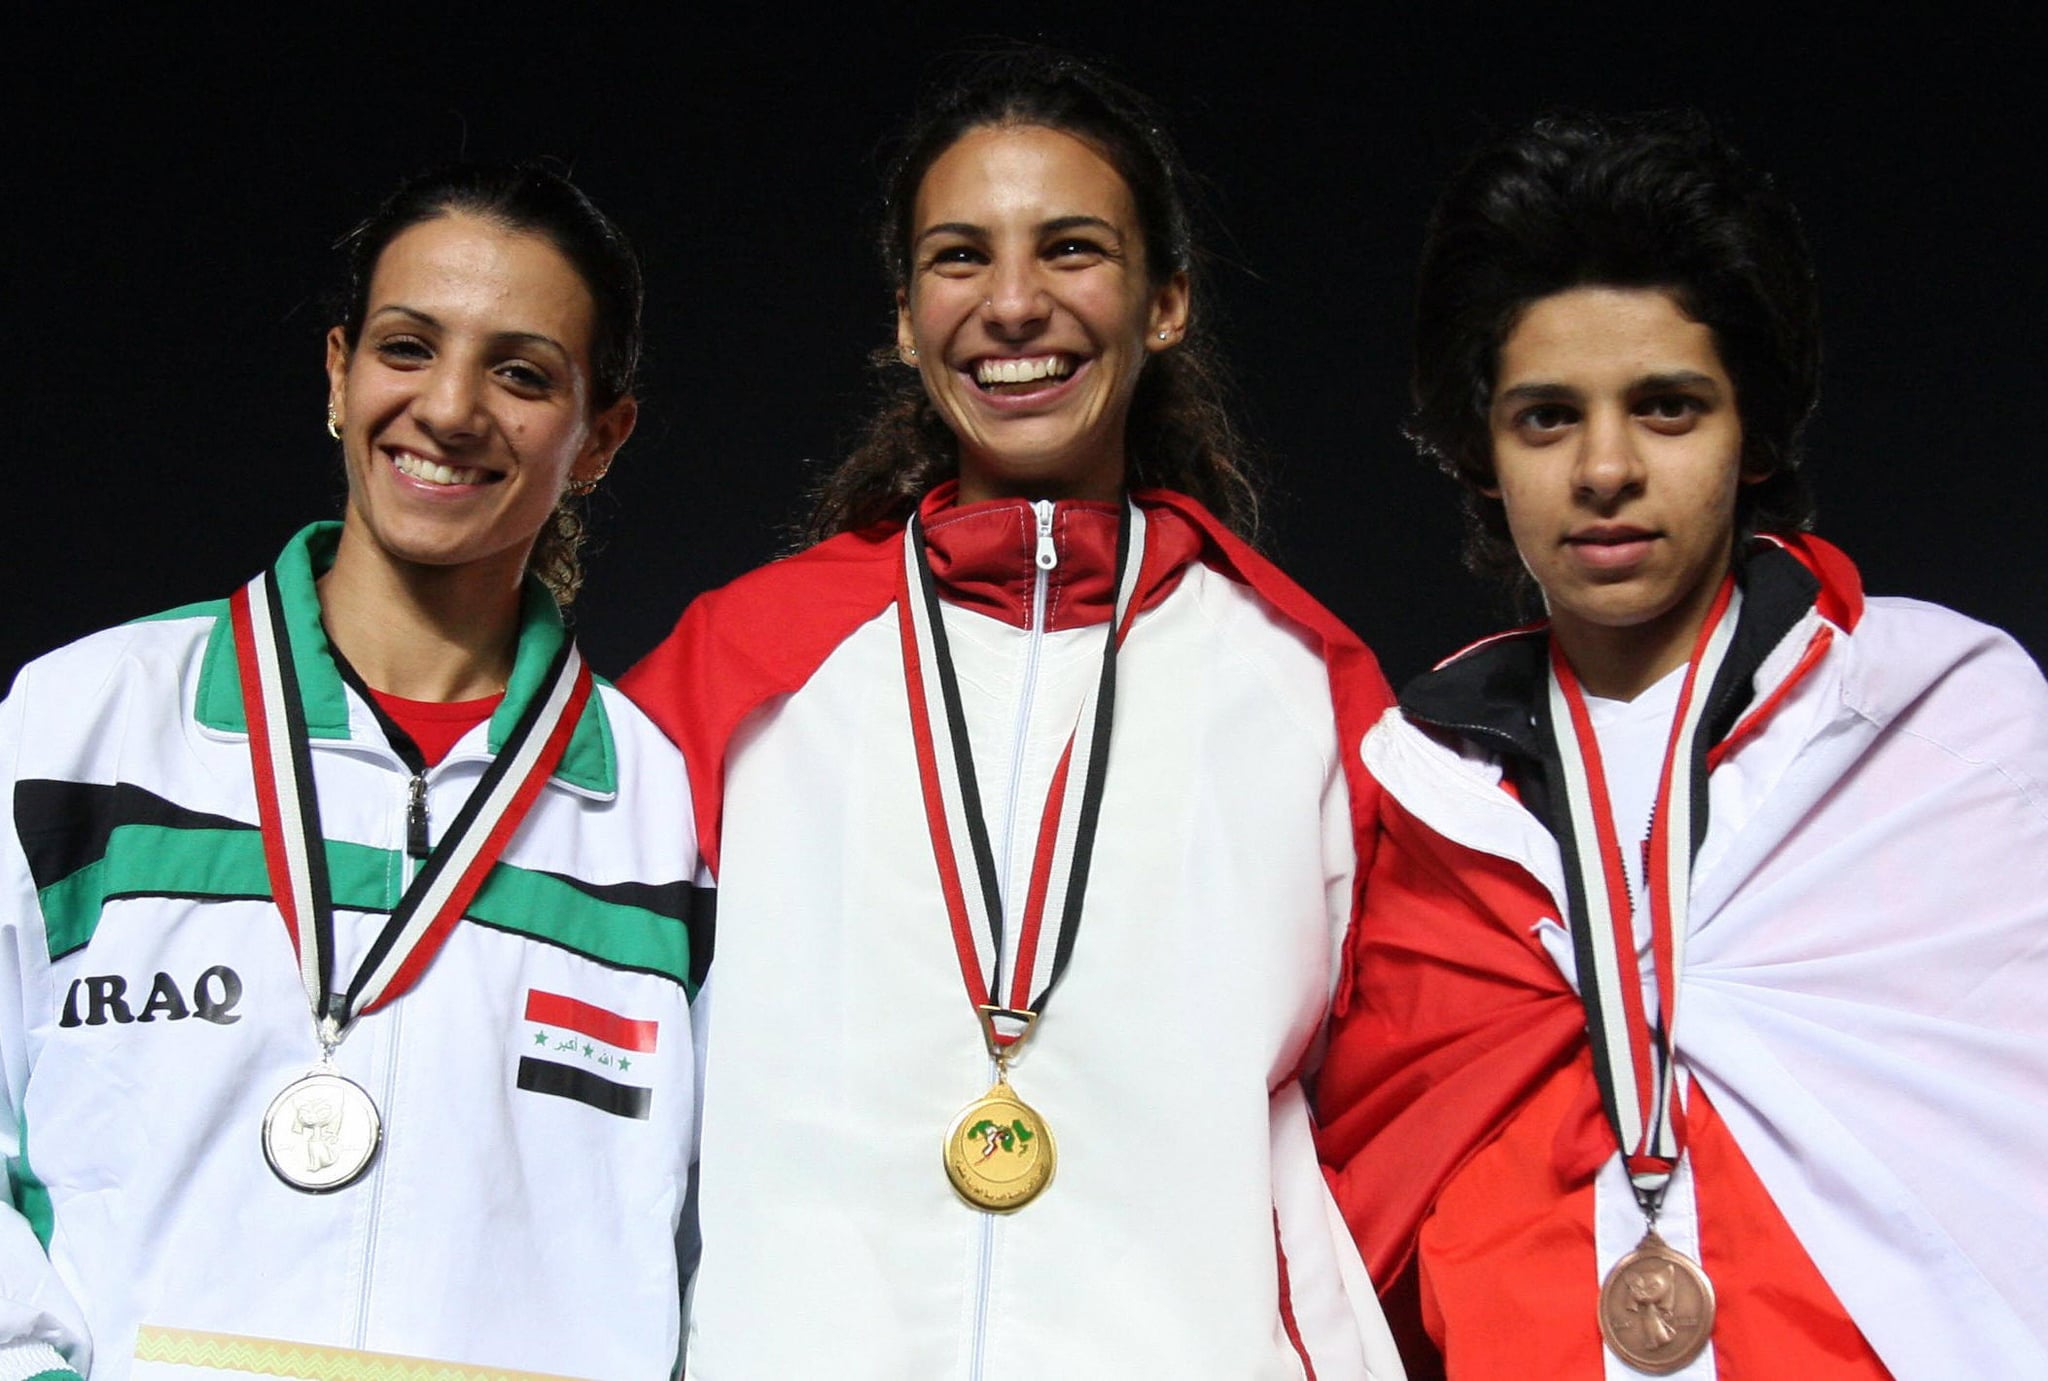 Iraqi And Iranian Olympic Athletes Showcase Talent And Culture Popsugar Love And Sex